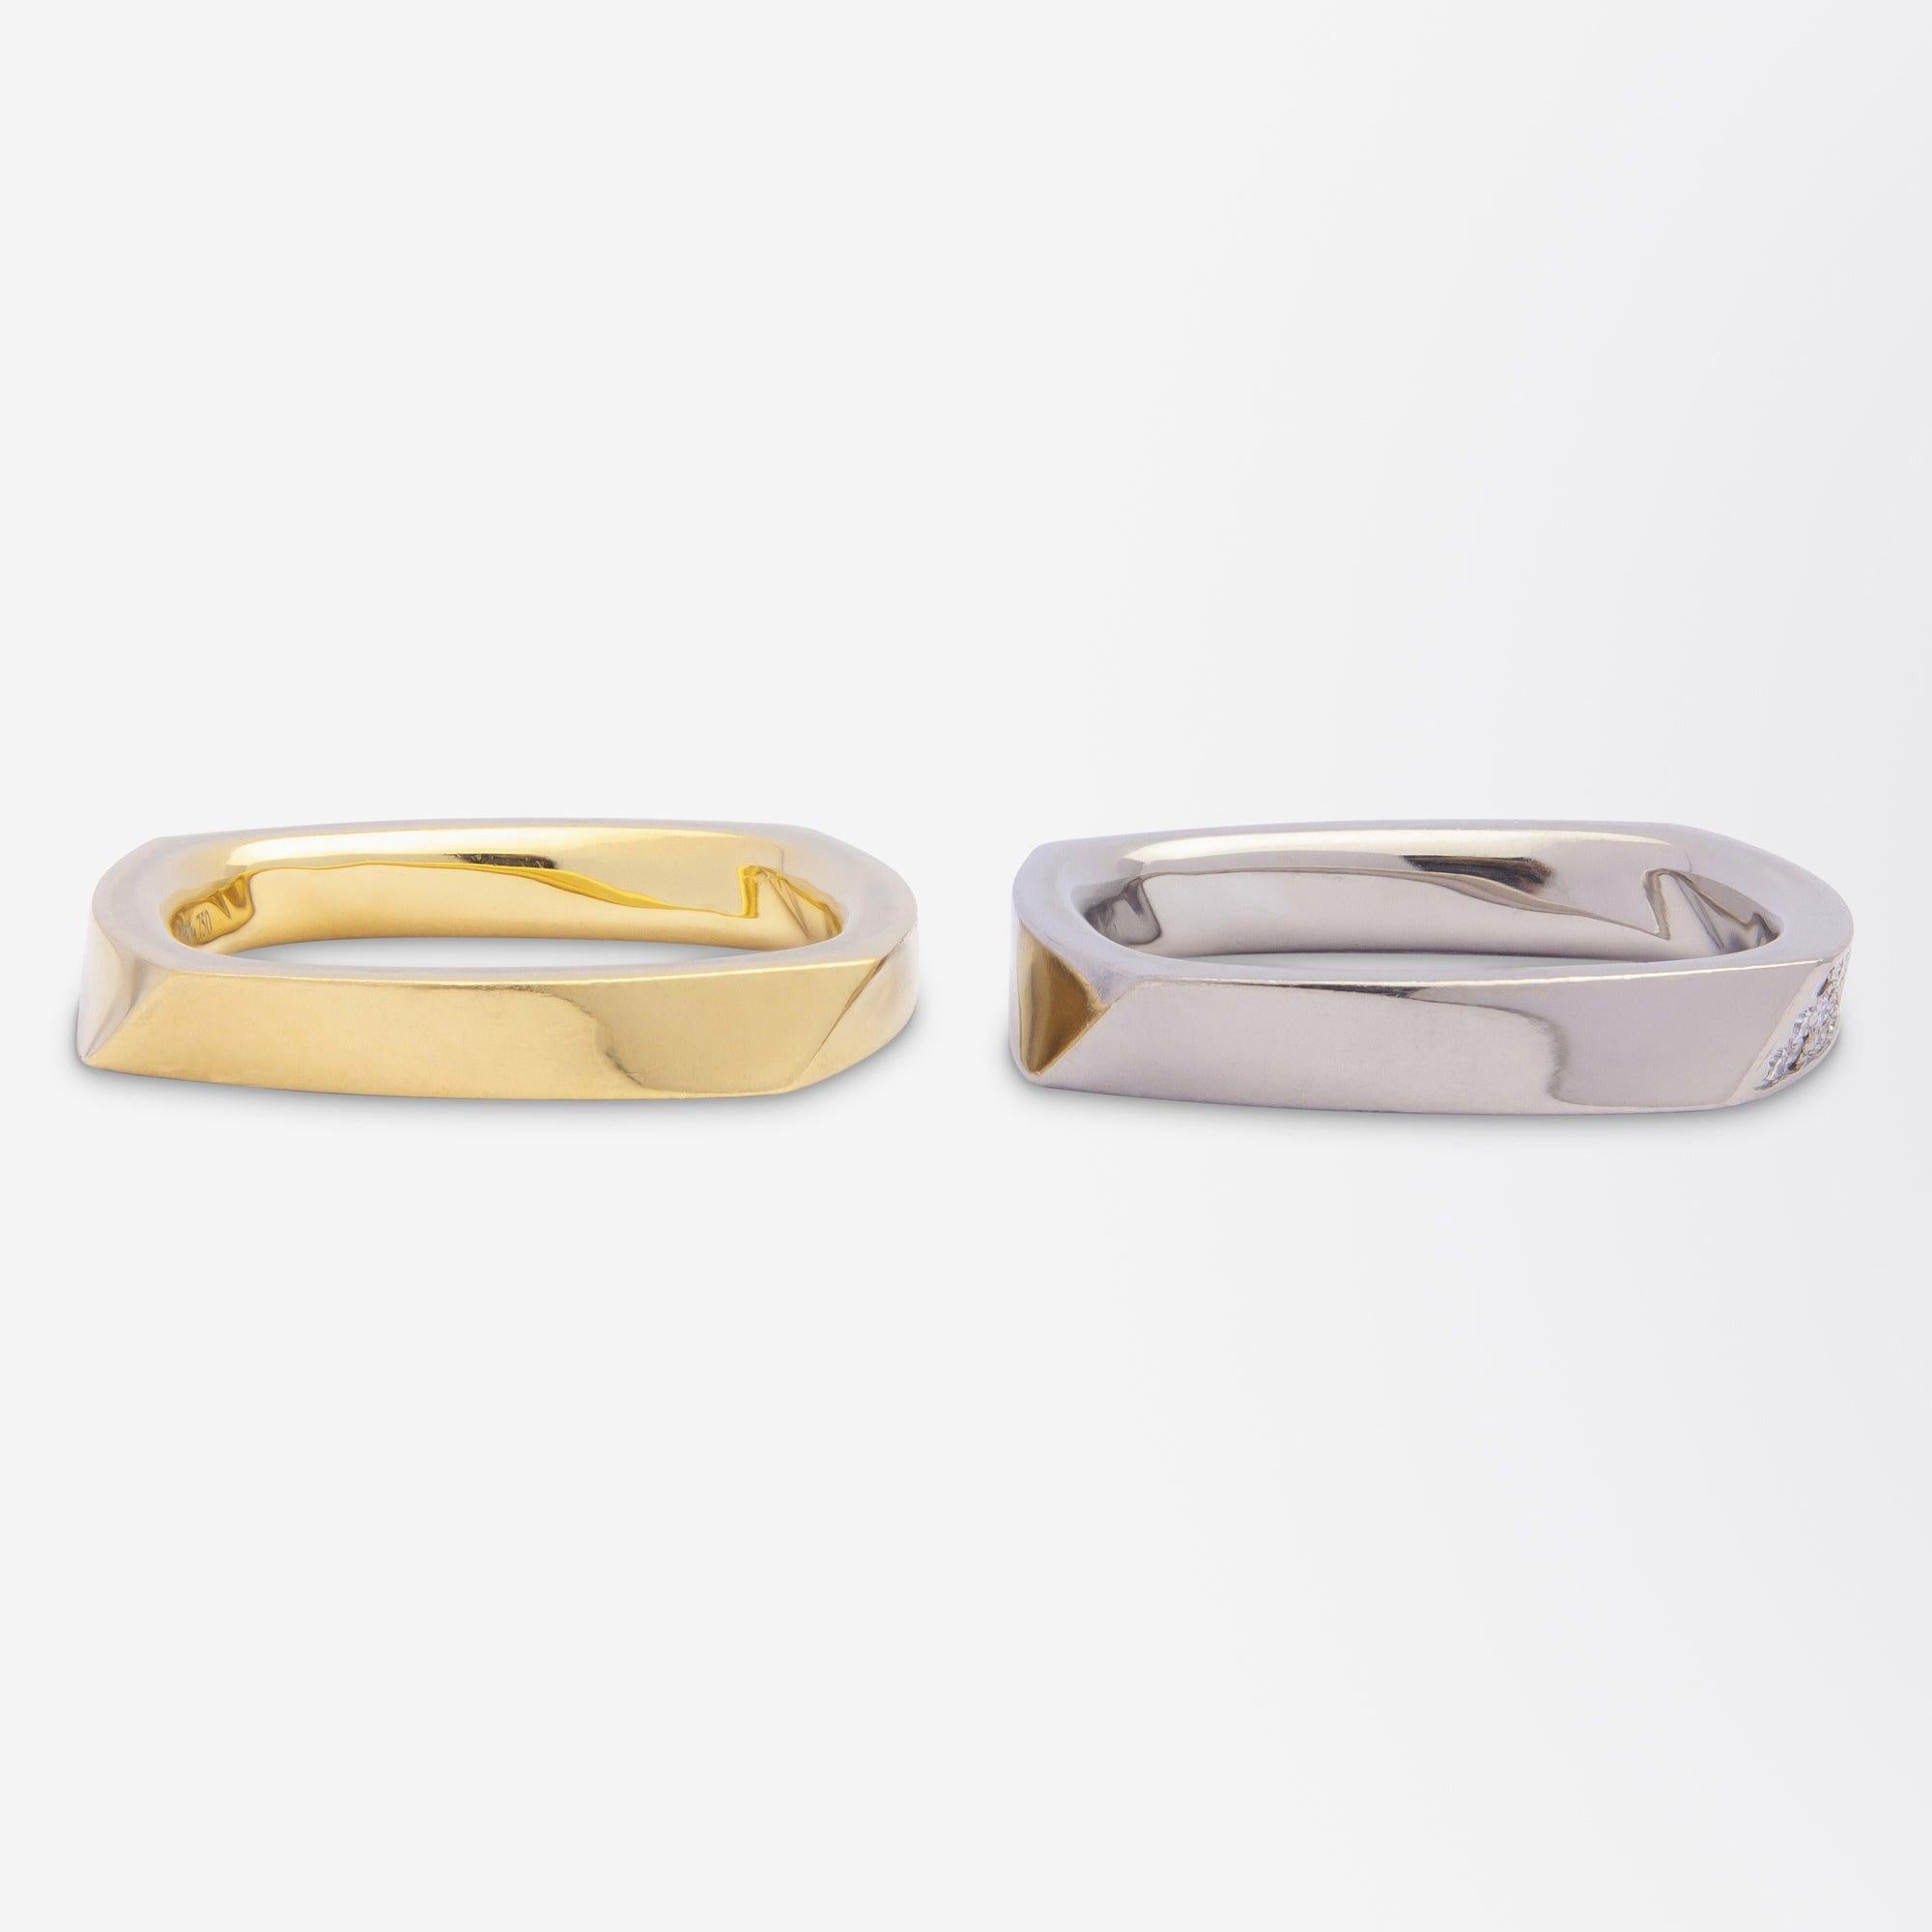 Modernist Pair of Rings by Frank Gehry for Tiffany & Co